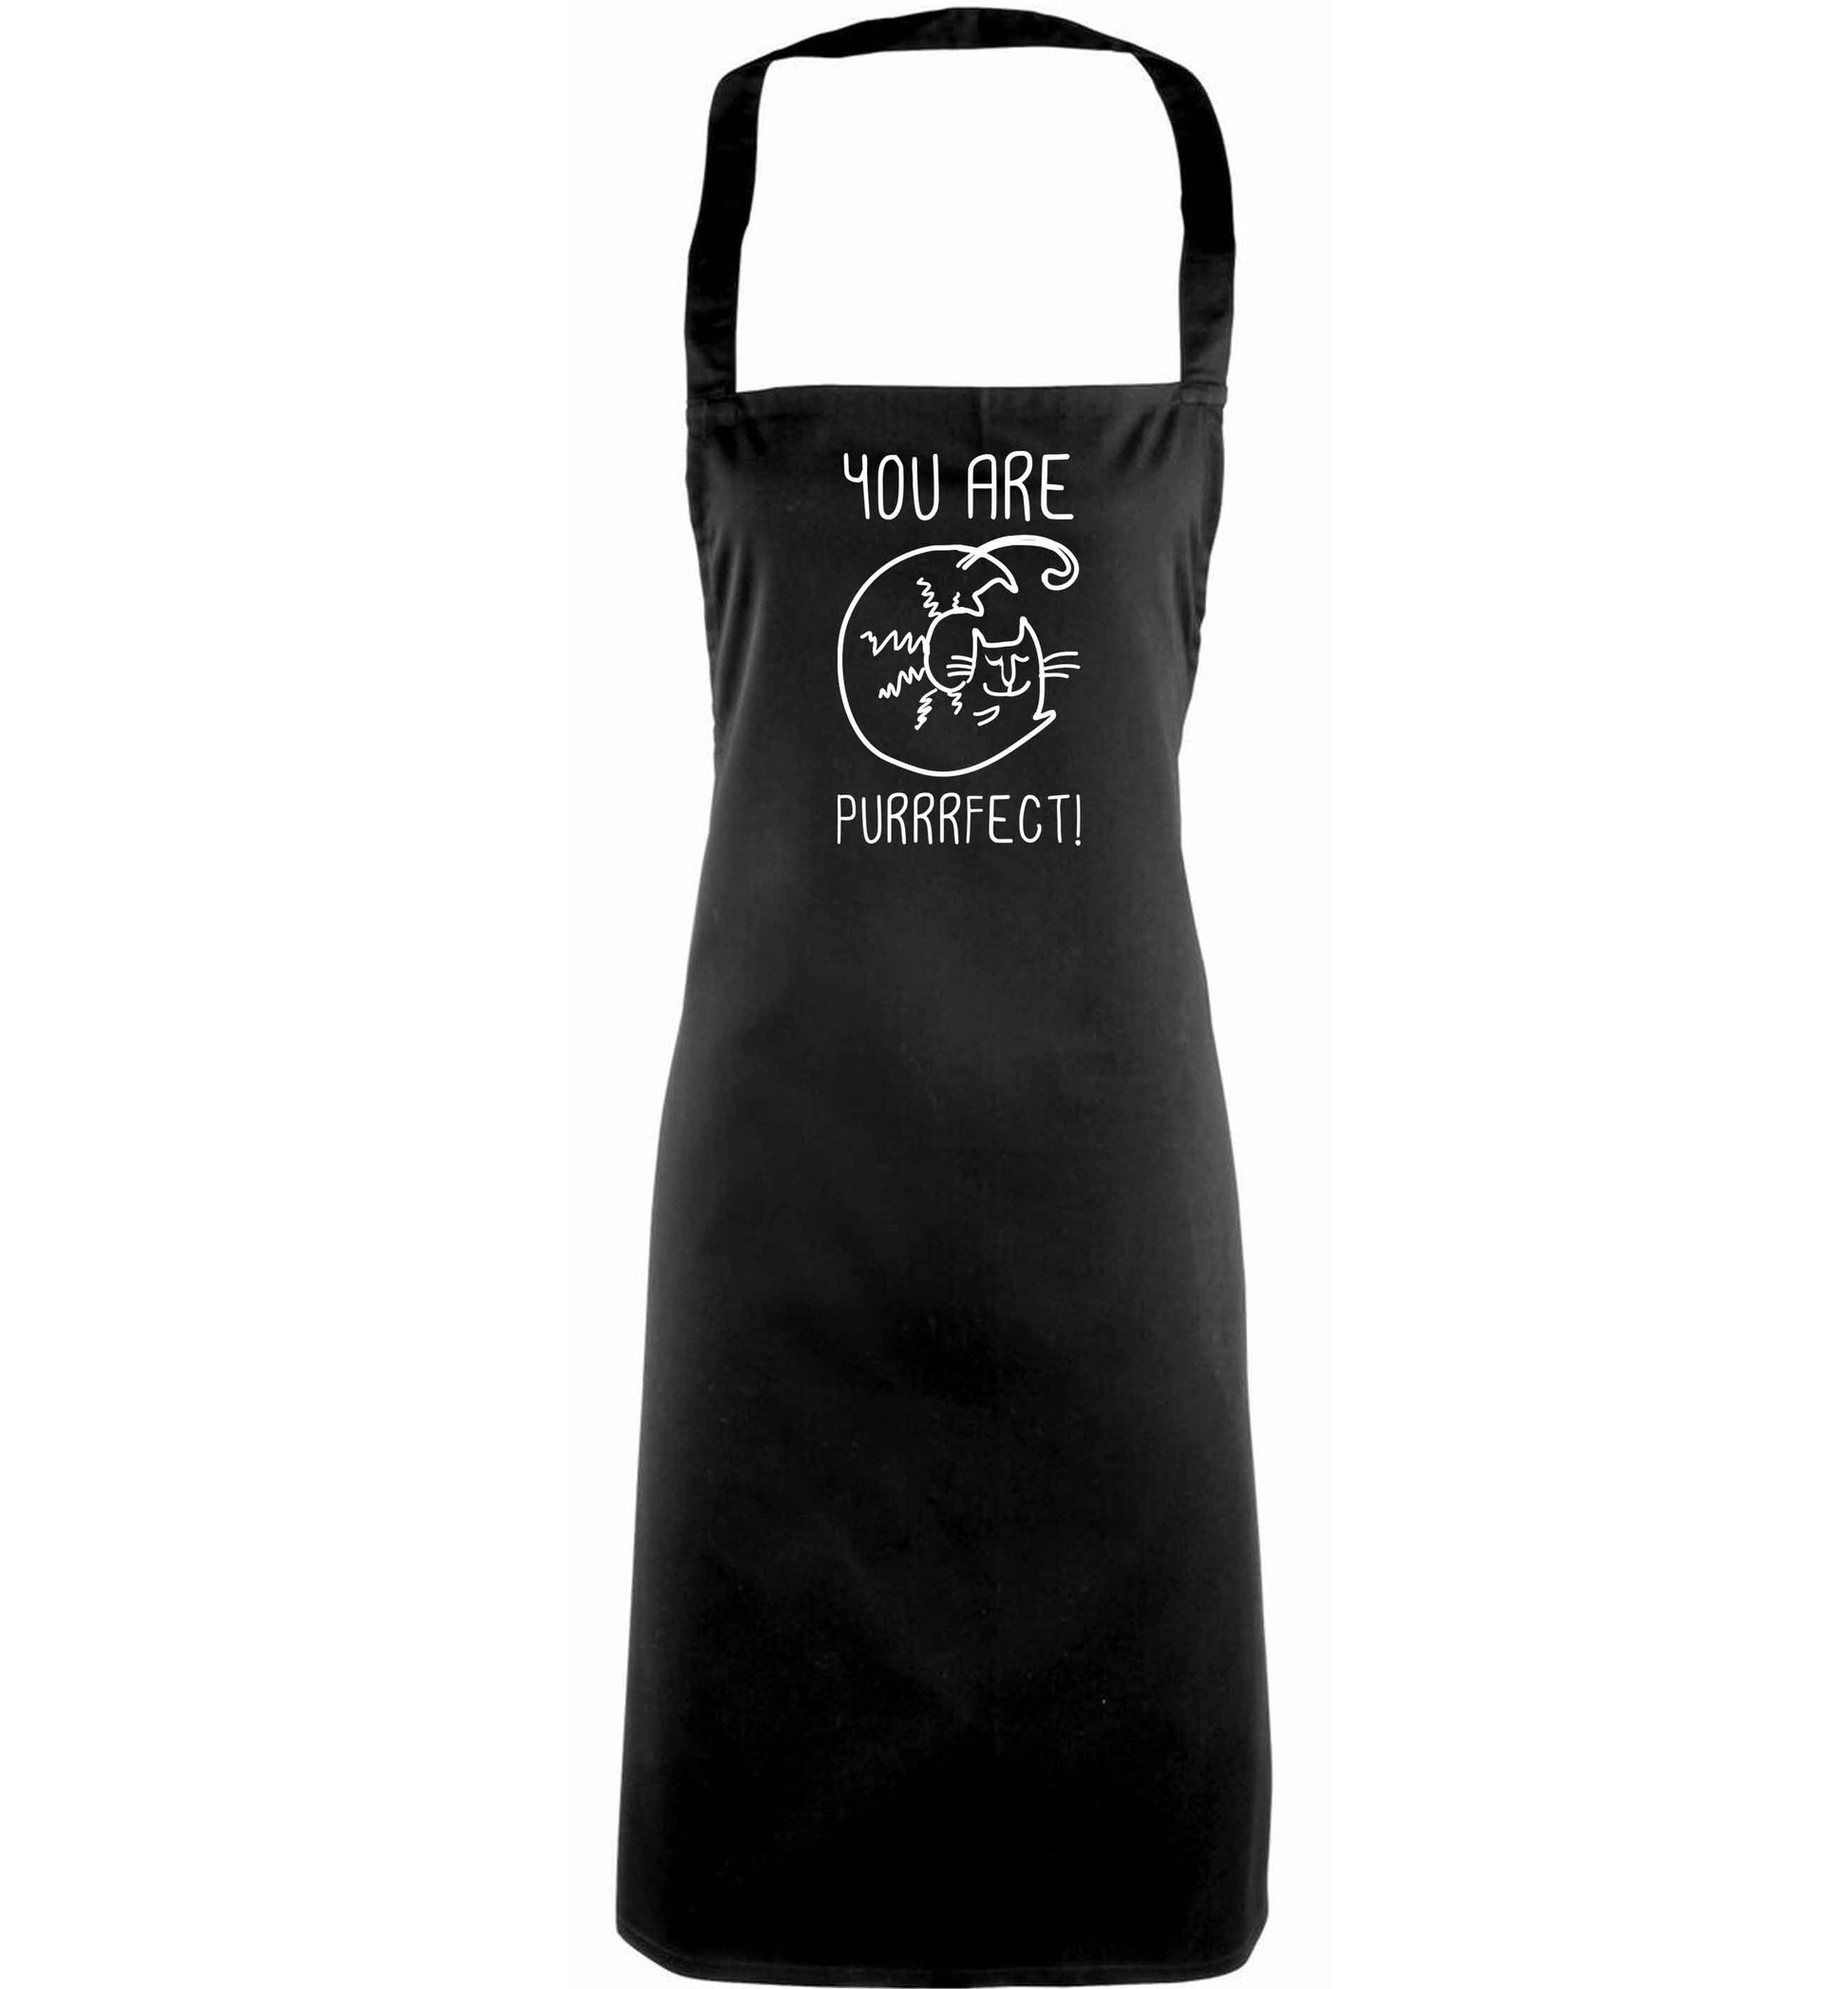 You are purrfect adults black apron